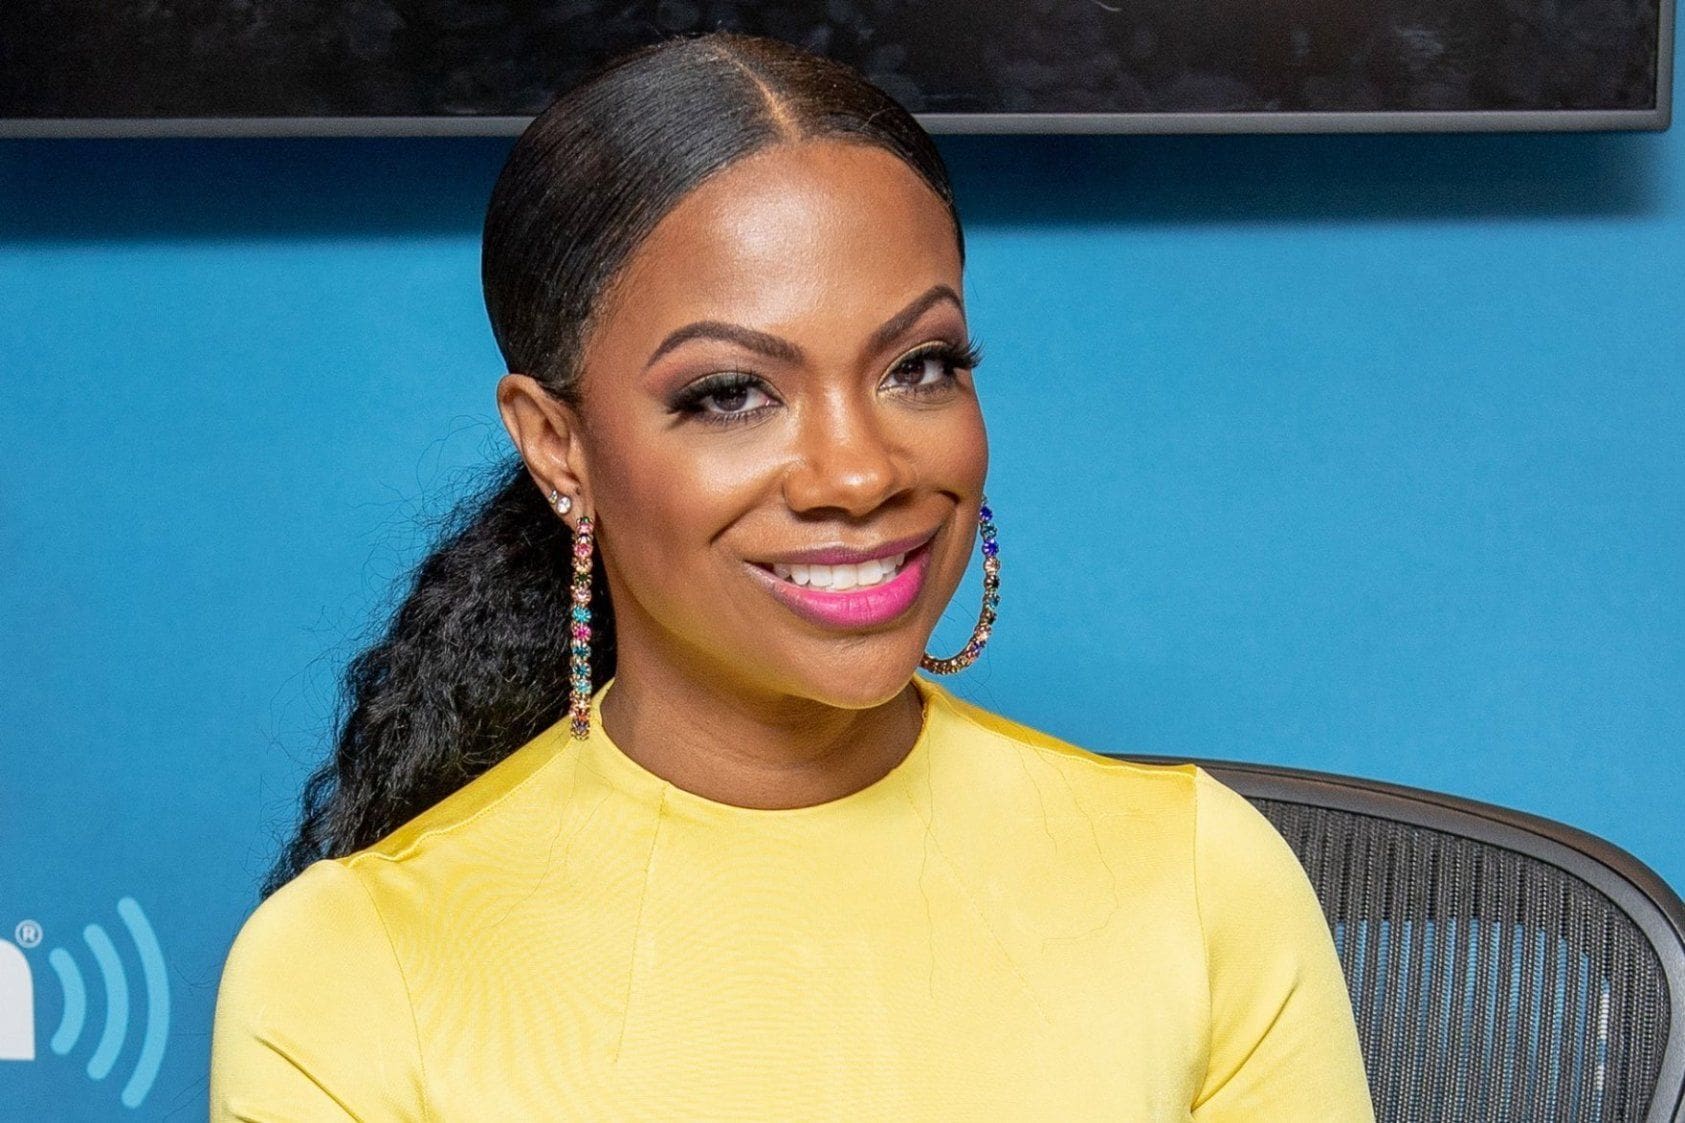 Kandi Burruss Shows Off Her Snatched Figure And Natural Hair And Gets Praised By Fans